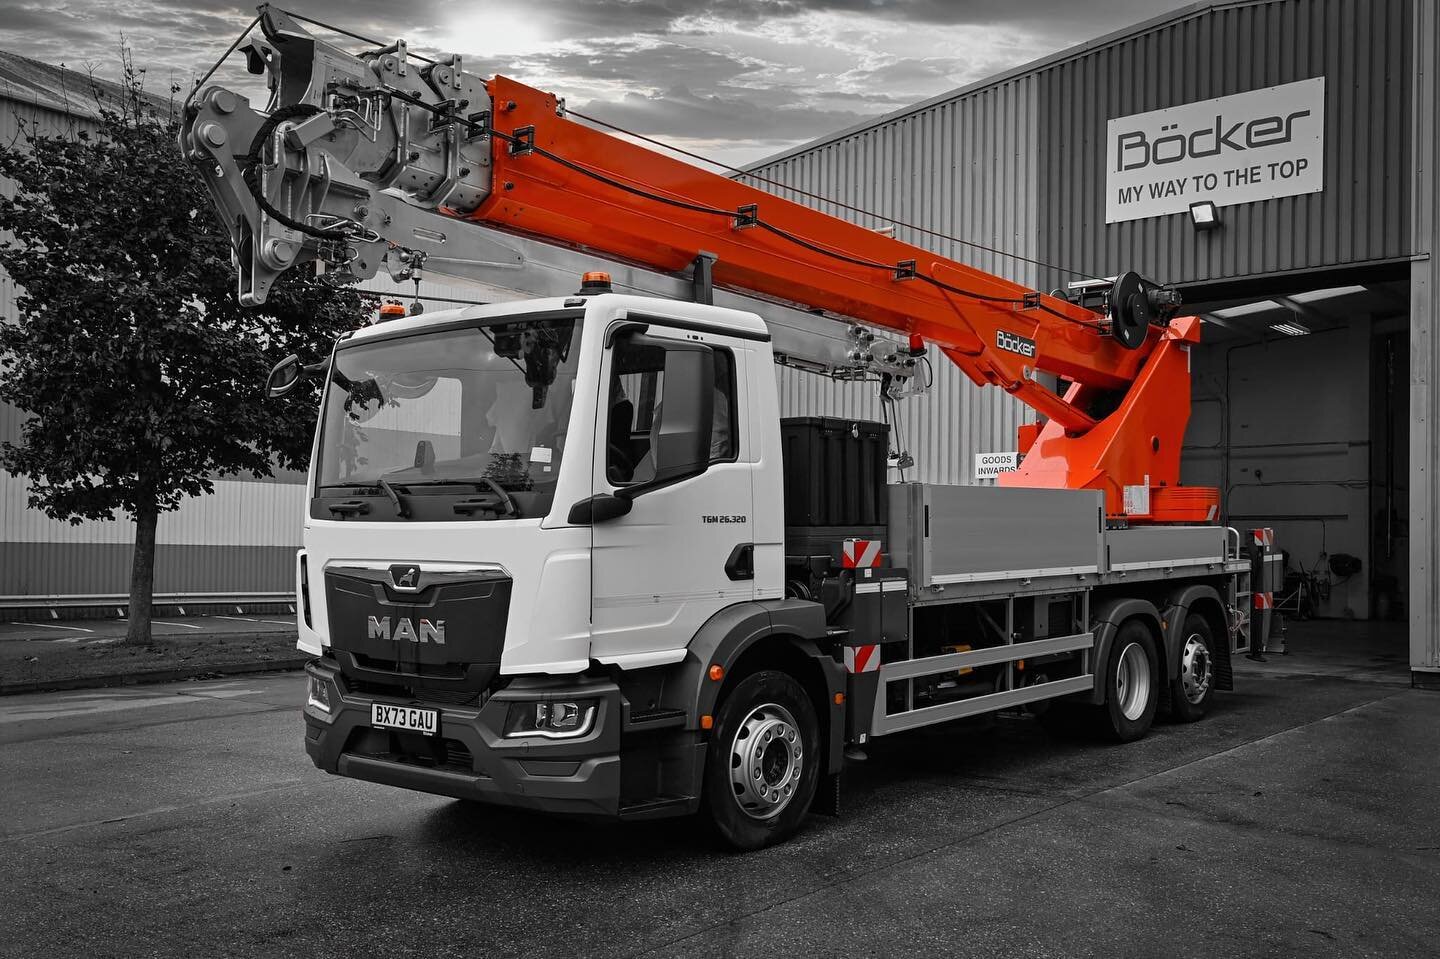 Coming soon....investment in the future continues #BCHC #Bocker #cranehire #investment #birmingham